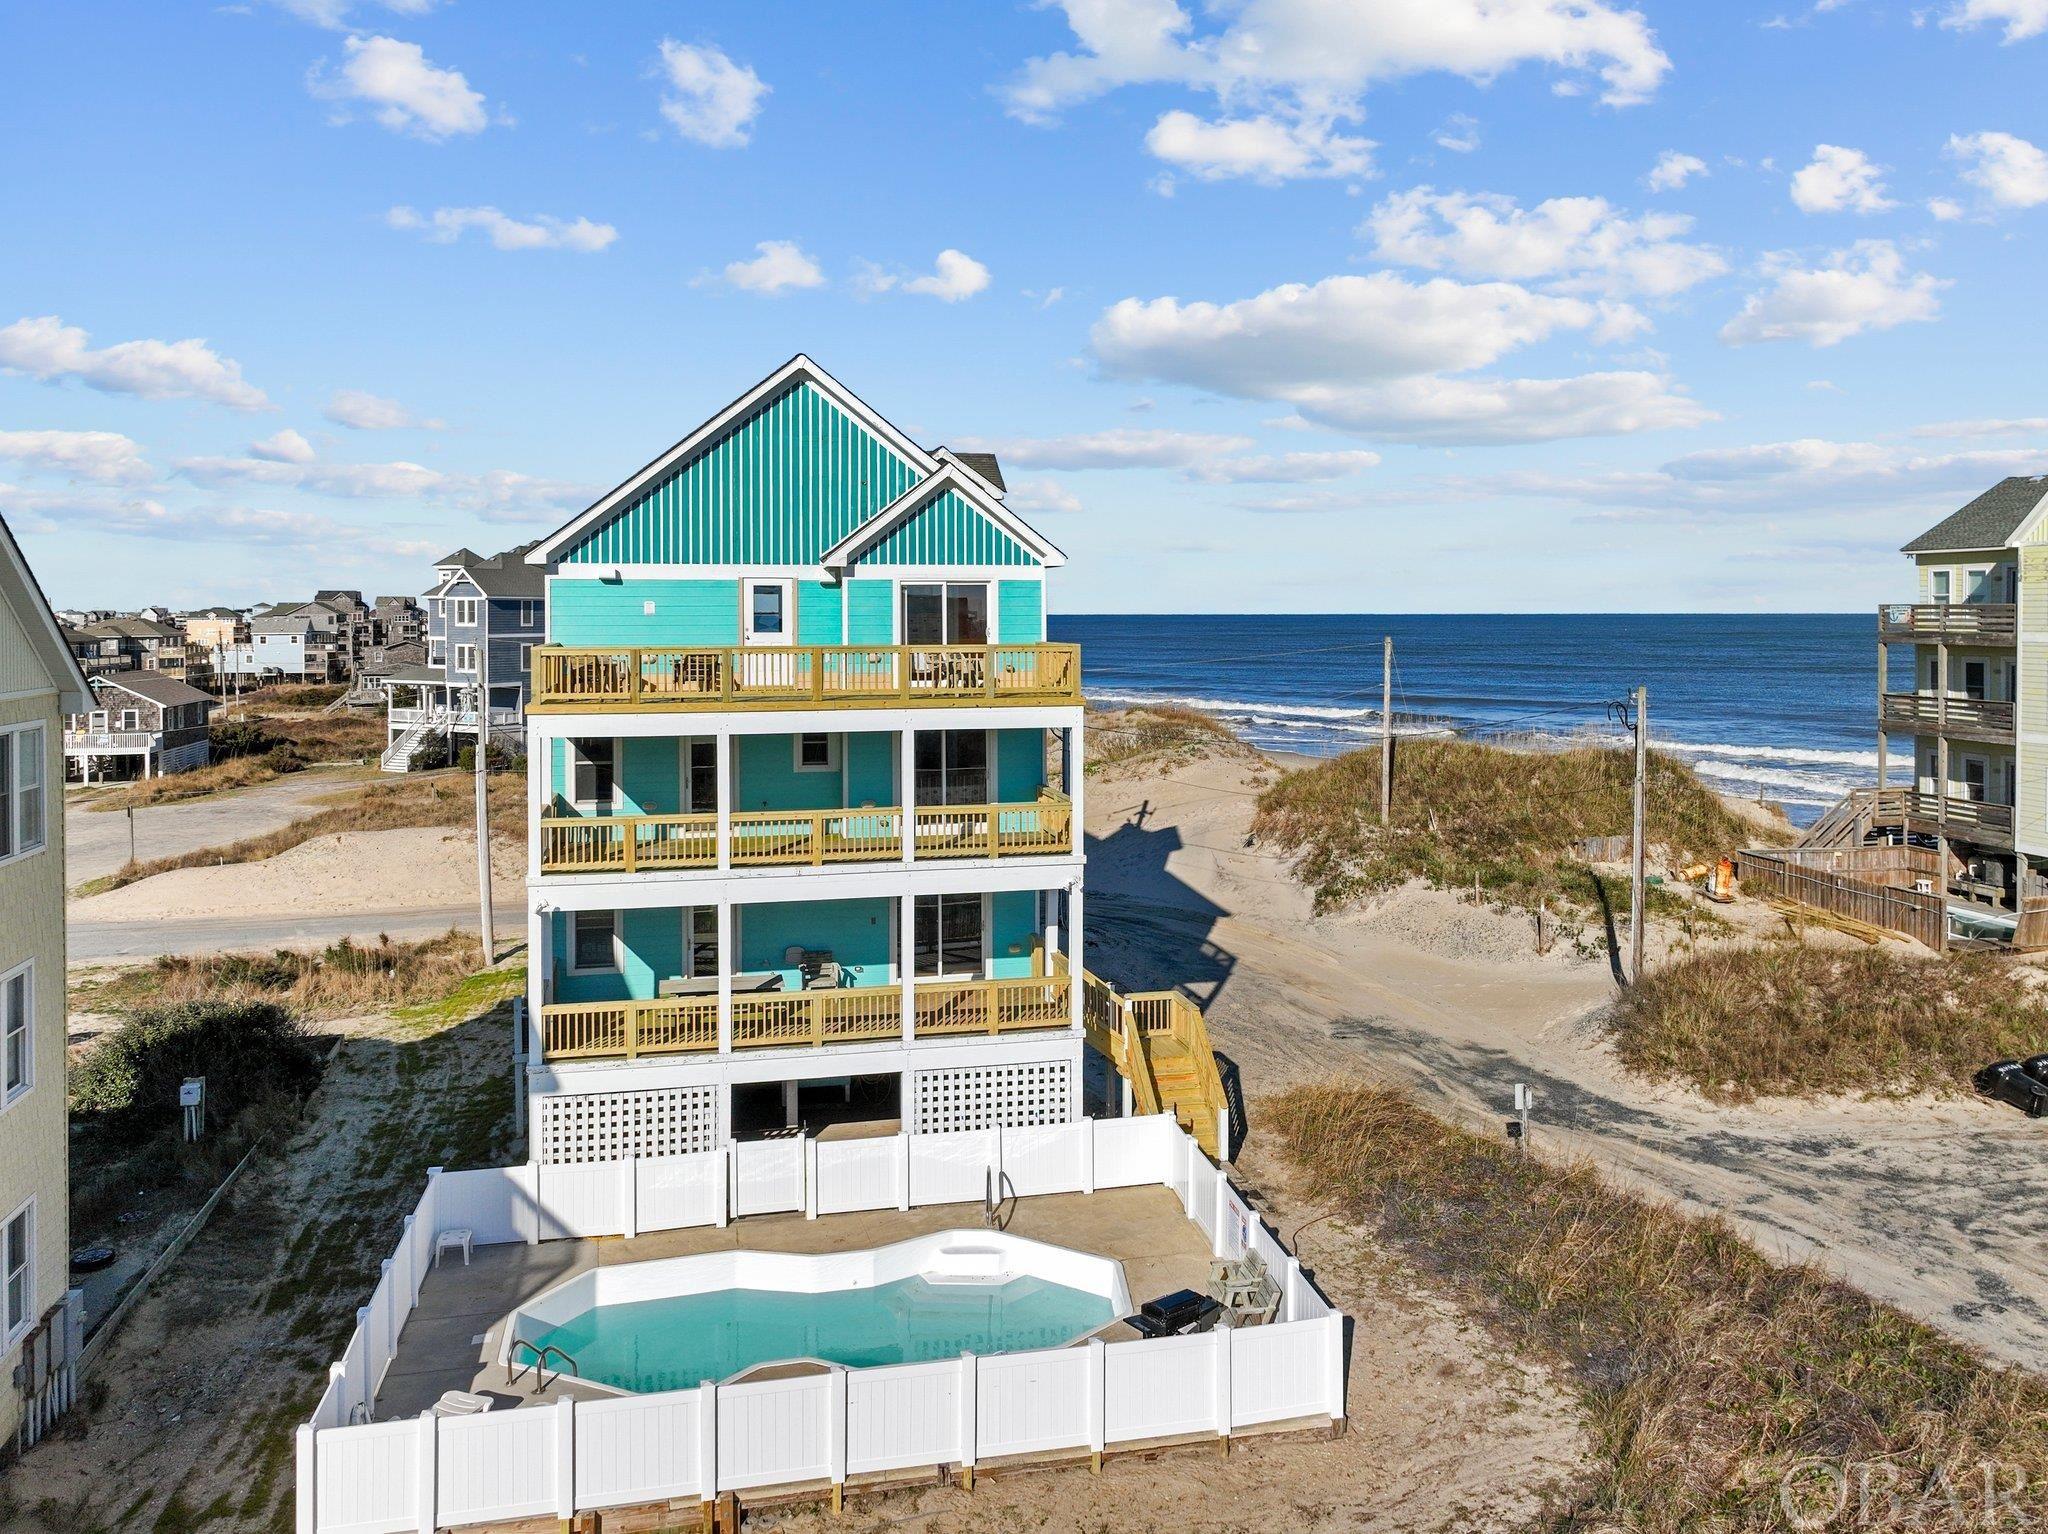 Experience coastal living at its finest in this Oceanside home in Rodanthe on Hatteras Island. Just one lot away from the oceanfront, enjoy easy beach access and a quick walk to Rodanthe Pier. Revel in breathtaking views from every level, spanning from the ocean to the sound. The renters love this home as it generates great income year after year; sleeps 17 and has a nice bunk room that adds extra space along with 5 ensuite bedrooms and fantastic amenities. Relax in the spacious great room with cathedral ceiling and open kitchen and dining for 16. You won't miss the custom tile compass rose on kitchen floor and double dishwashers for your larger groups. Each bedroom has it's own private bathroom with beautiful tile upgrades. There is a flex room that is currently used as a bunkbed room featuring double doors leading out to the game room with pool table and a wetbar with 2 mini/beverage refrigerators. Gorgeous hardwood floors throughout common areas and nice 6-panel wood doors are a step up to quality construction. This beautifully furnished vacation rental with all the amenities generated an impressive $125,000 in income last year.  The home is handicap-friendly, featuring an accessible bedroom and bathroom with the convenience of an ELEVATOR servicing all floors. Unwind by the private pool with ocean vistas, and indulge in year-round relaxation with the brand-new hot tub. Your coastal retreat awaits!  Recent 2023-24 upgrades include newly replaced decks and railings on rear and top levels, brand new hot tub and hot tub deck, new pool fence, new couches & chairs in living room and crows nest and fresh interior paint. Other recent items replaced are kitchen appliances(2020-2022), refinished hardwood floors(2021) and one HVAC(2021).